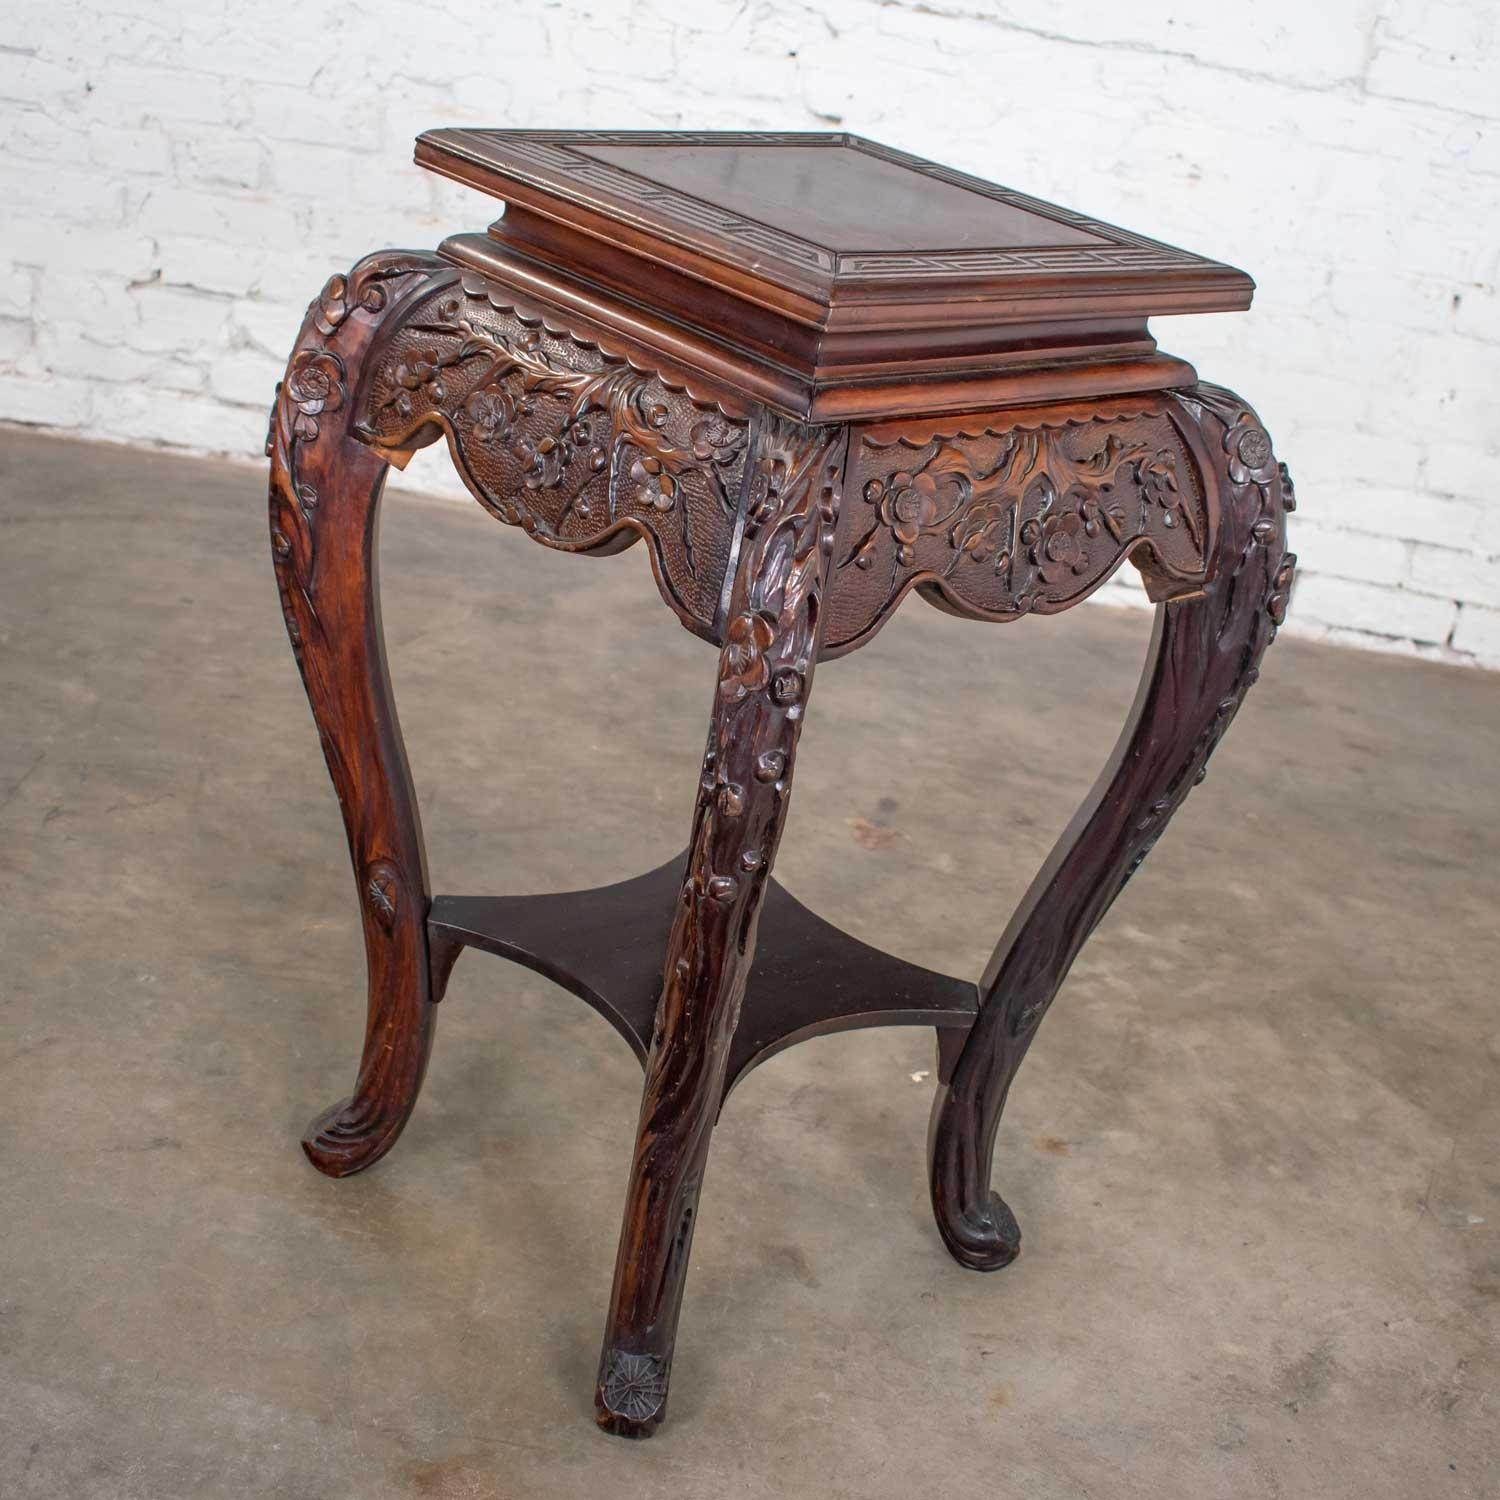 Chinese Antique Asian Pedestal Table Rosewood Color Hand Carved Cherry Blossoms